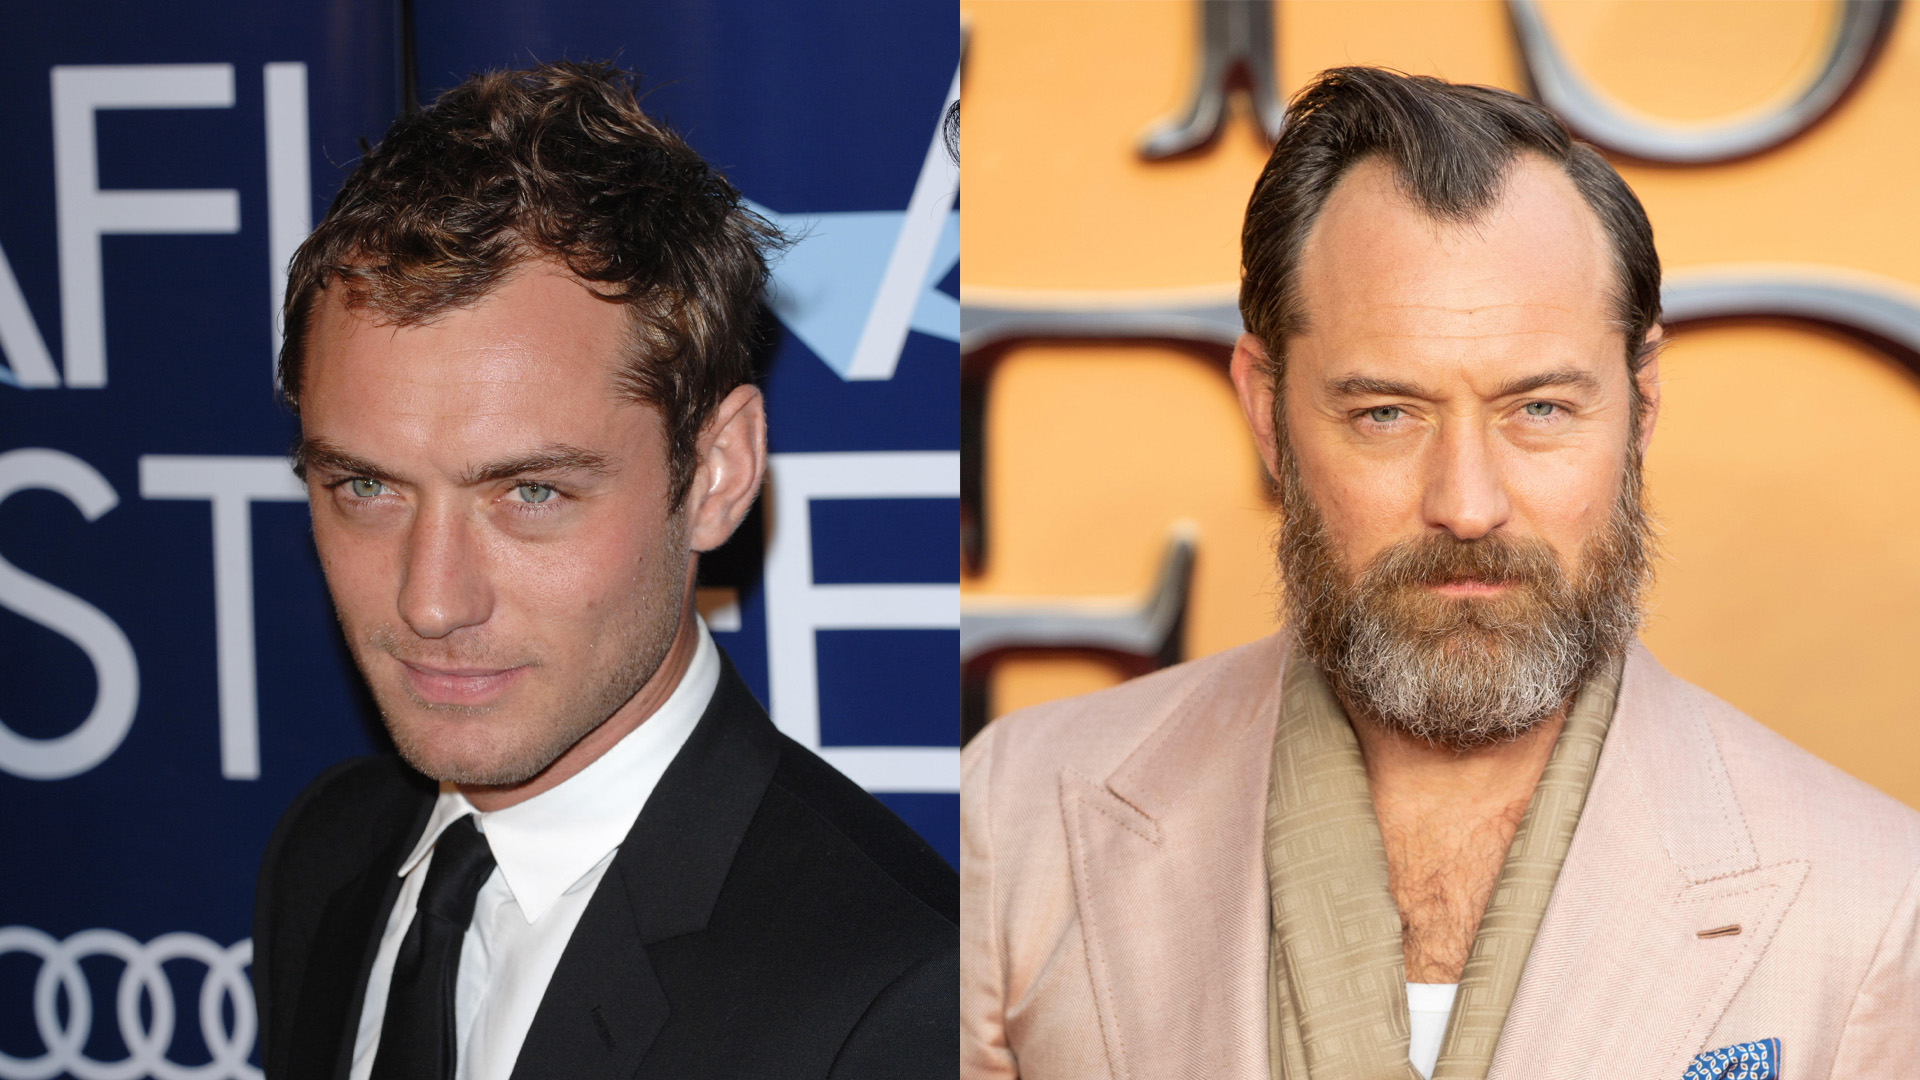 Where Are They Now? The Evolution of the Sexiest Men of the 2000s